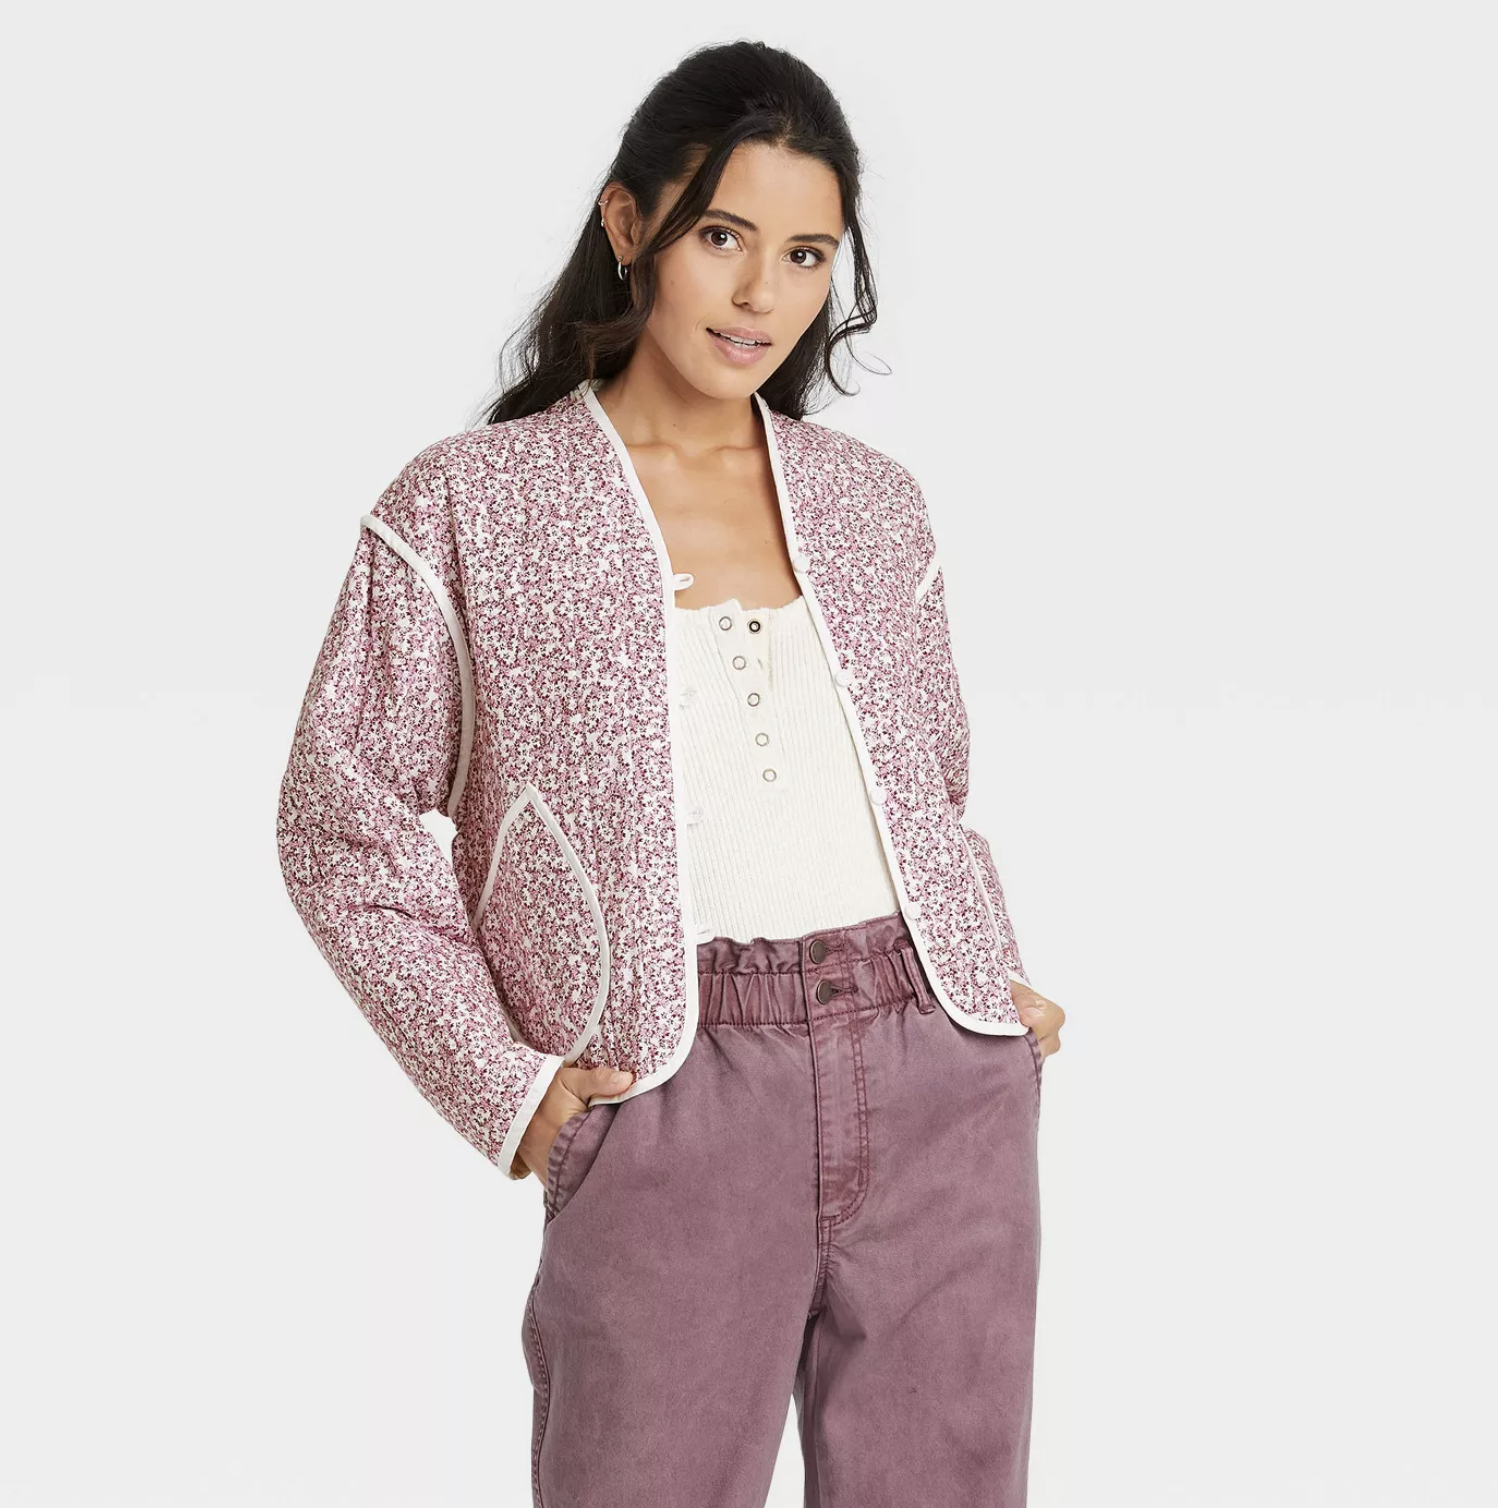 the quilted jacket in a pink and white flower pattern